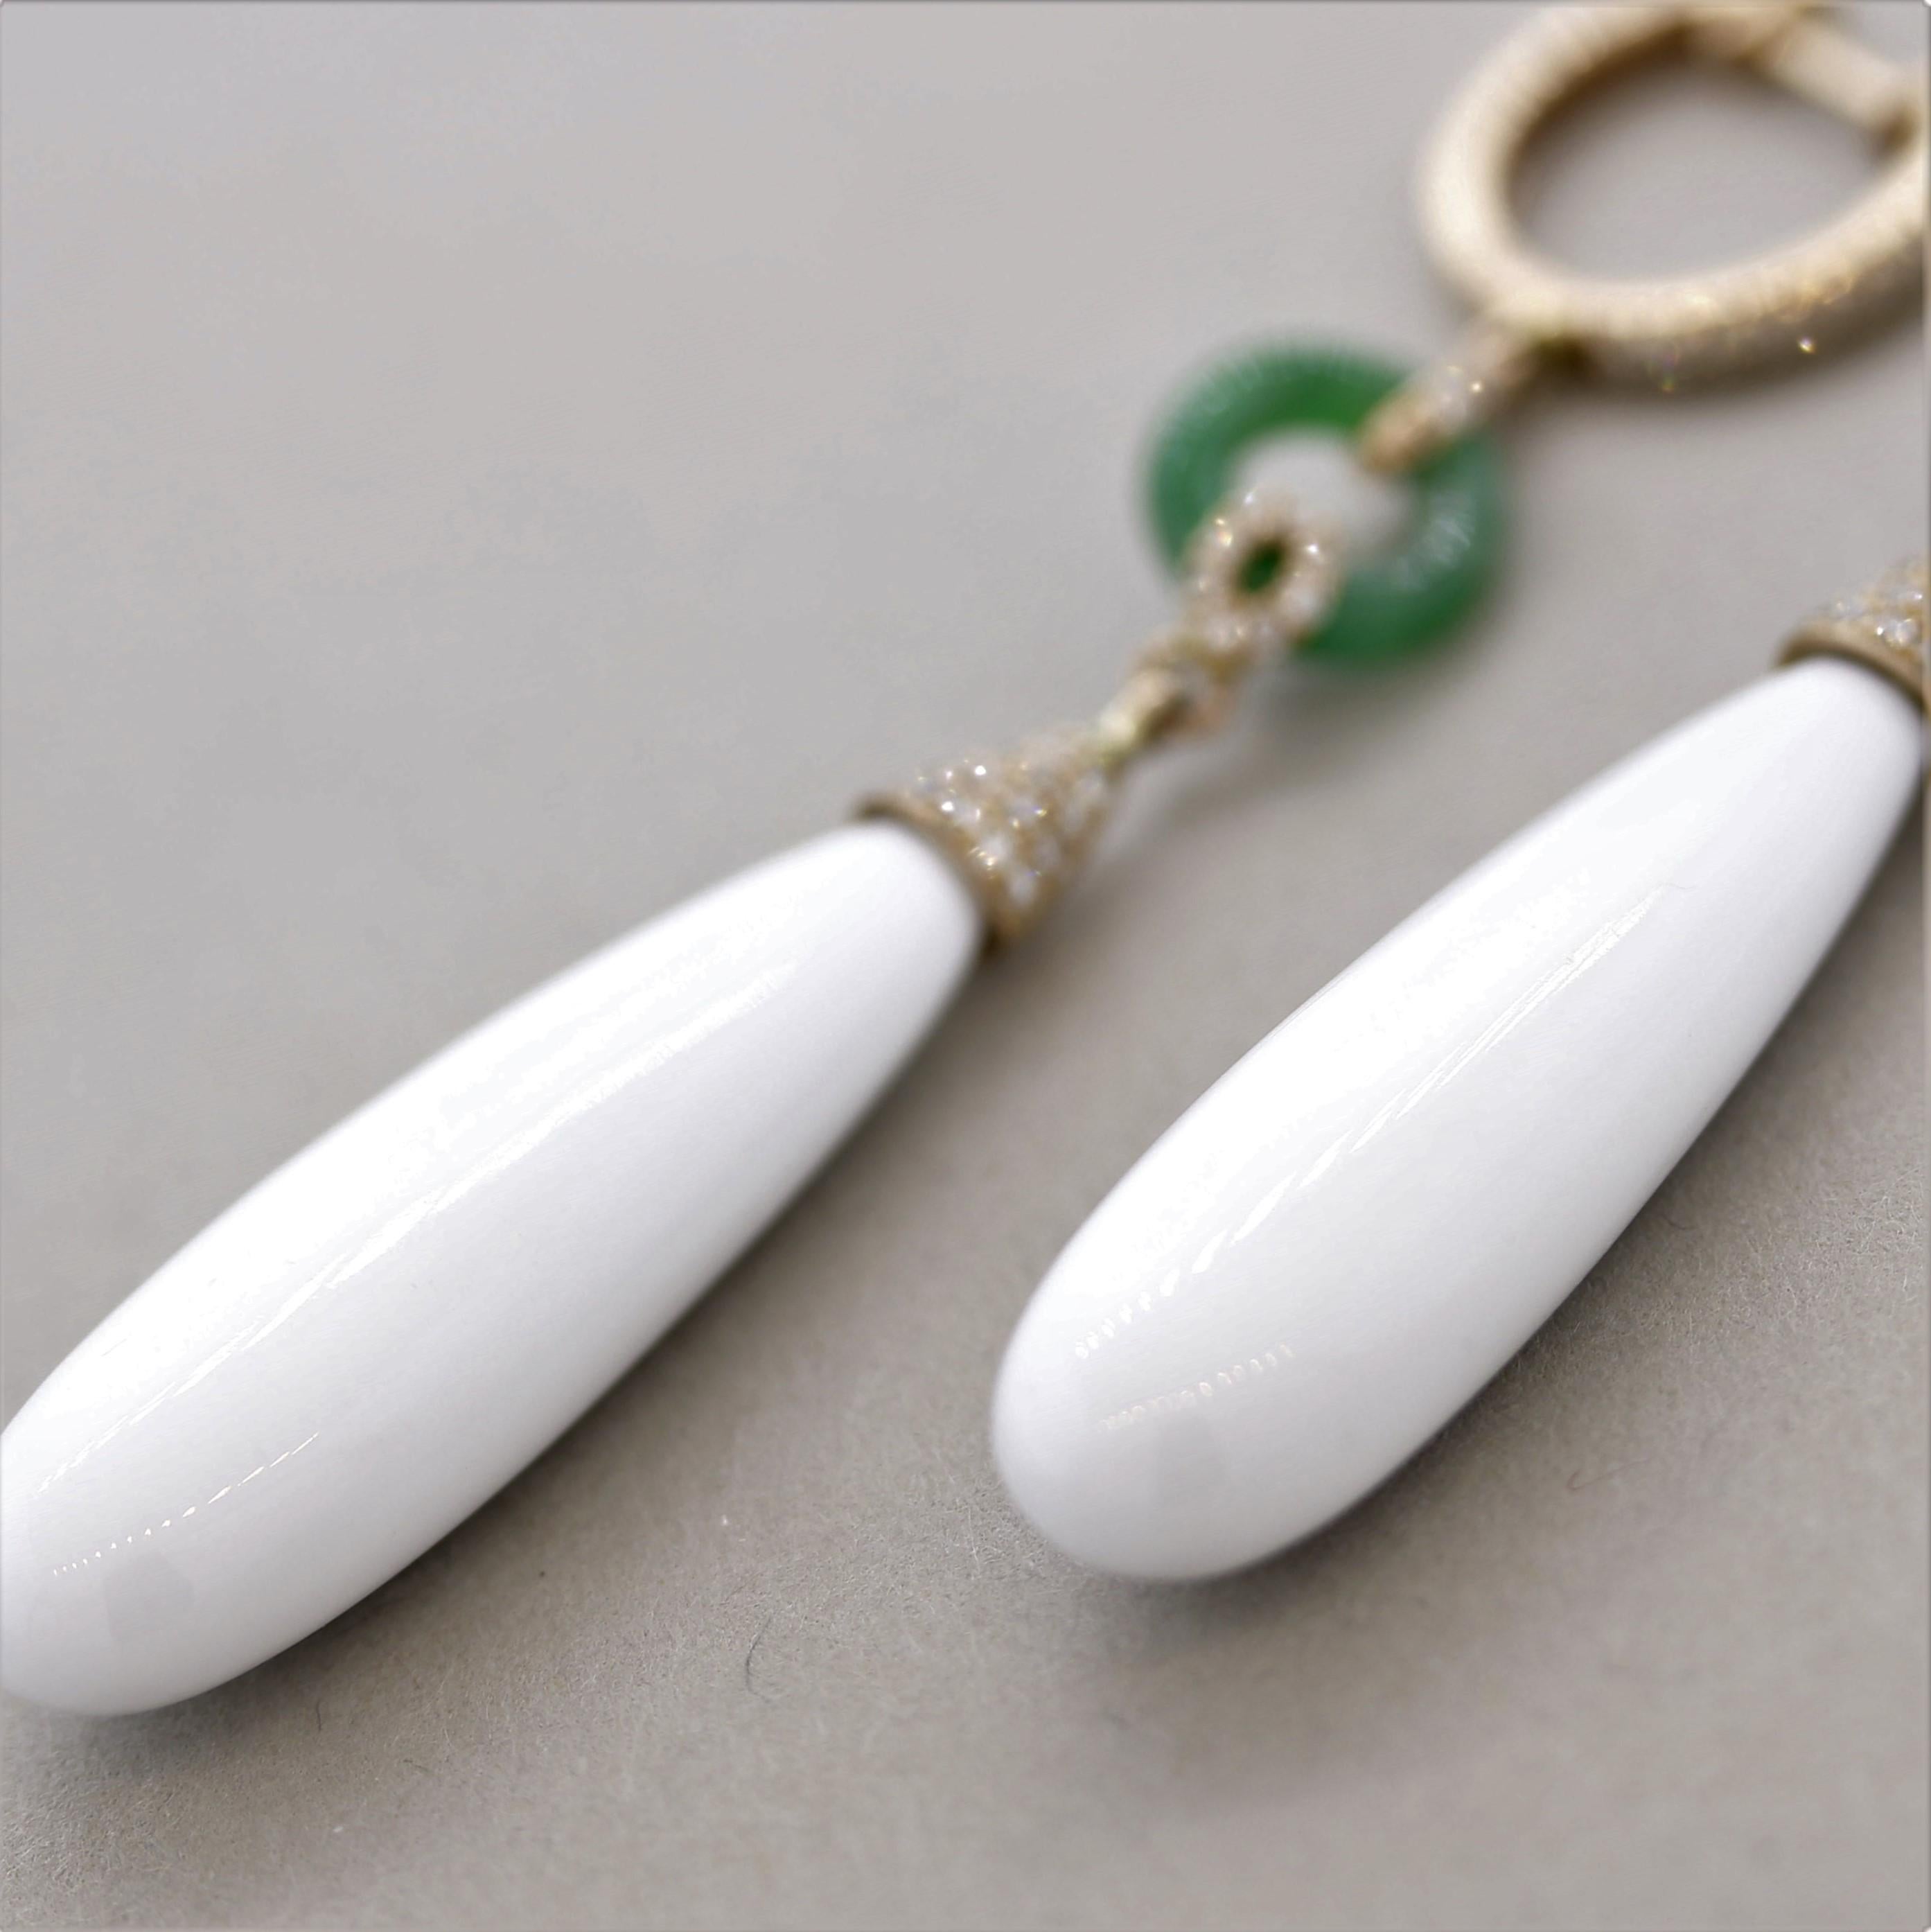 A stylish and chic pair of drop earrings! They feature 27.35 carats of smooth drop-shaped white onyx. Accenting them are 0.41 carats of round brilliant-cut diamonds which add sparkle and brilliance to the piece. Finishing the earrings are two